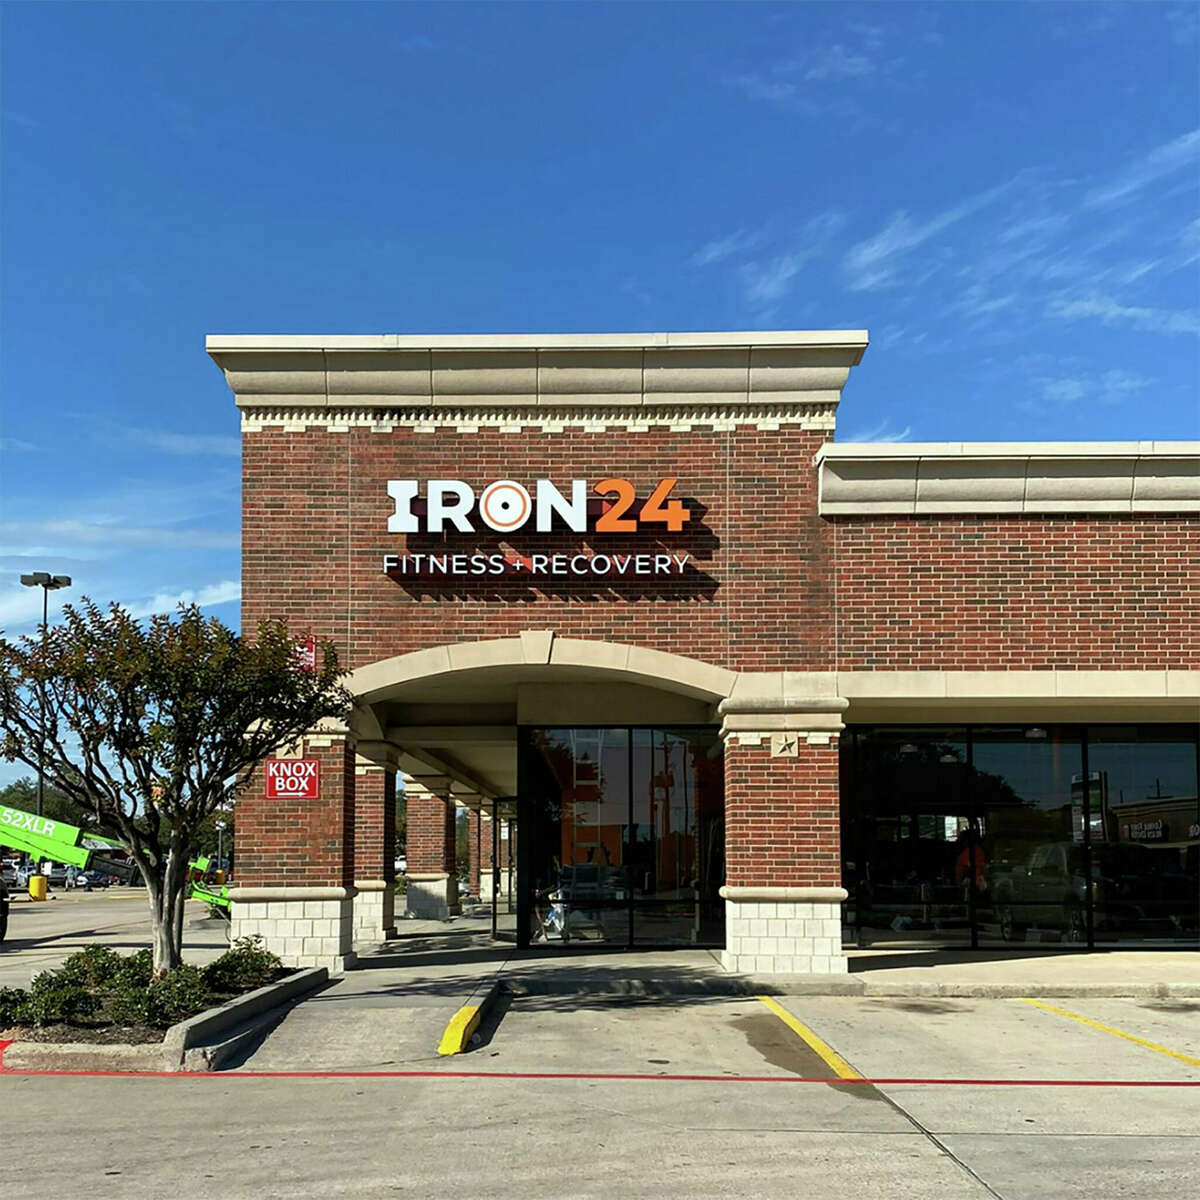 The newly opened Iron 24 gym in the Conroe Shopping Center. The gym is one of many to come in the Houston area.